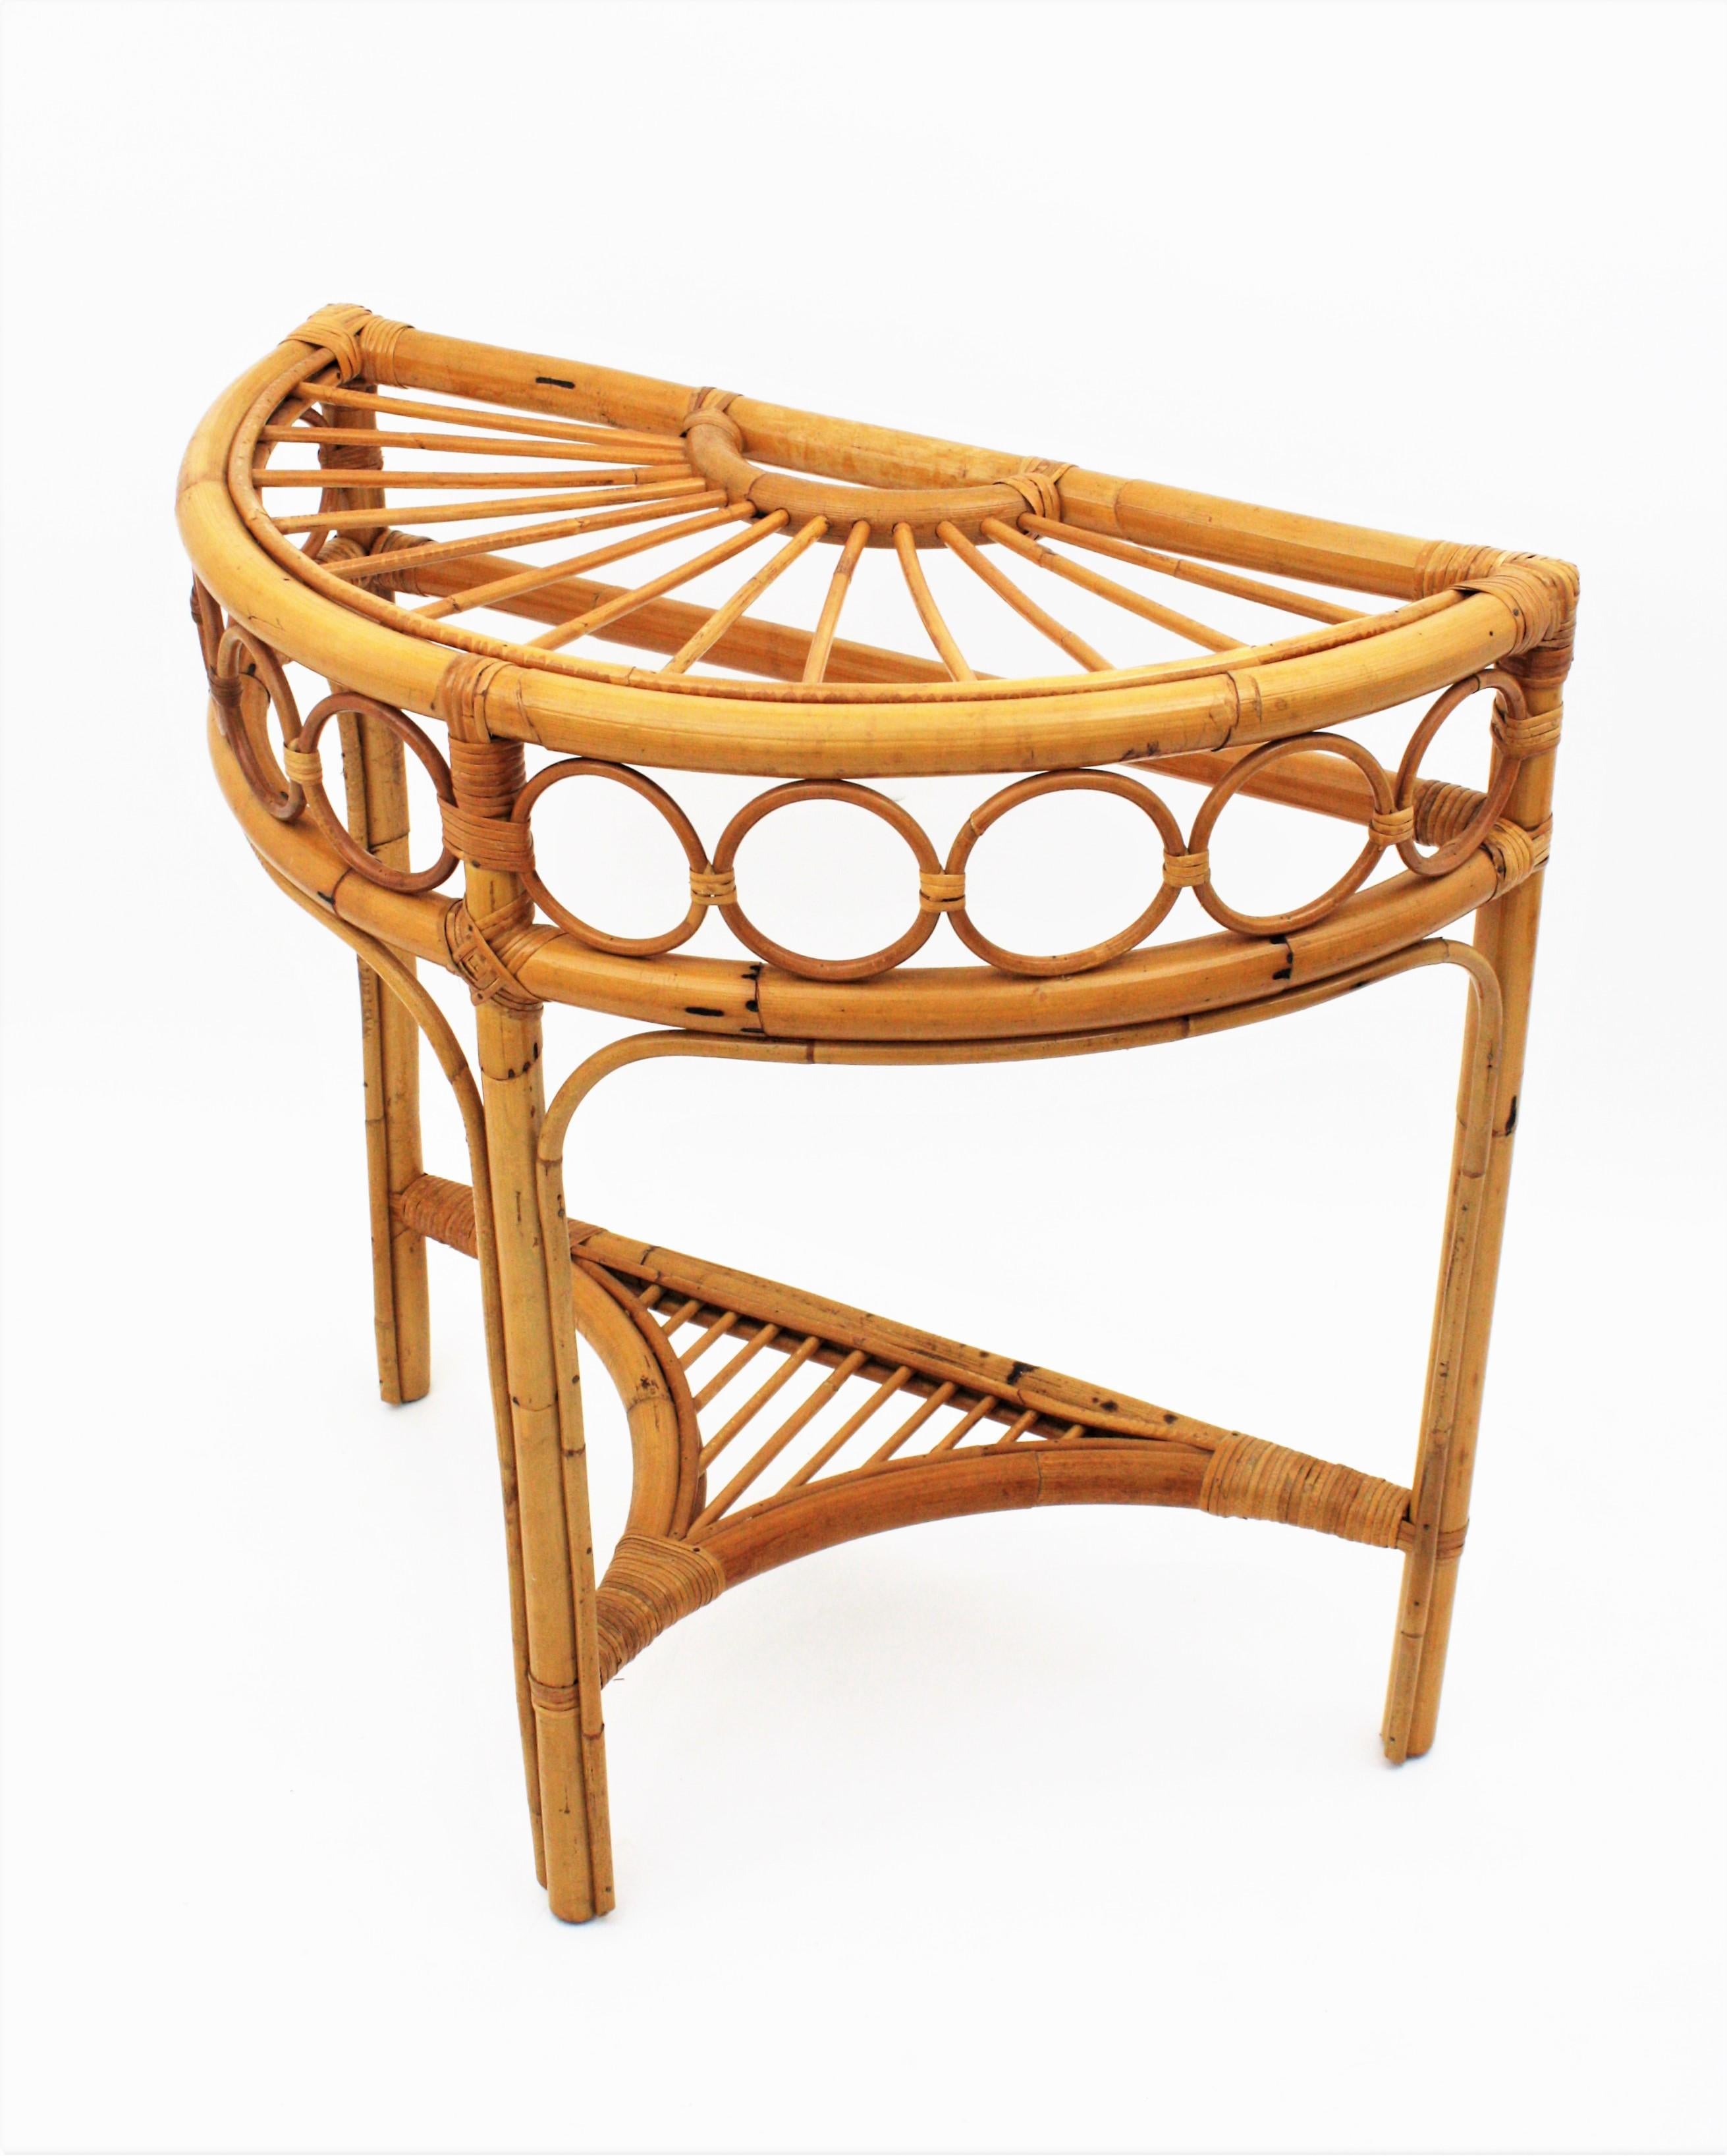 Eye-catching bamboo and rattan arched console table with rising sun top. In the style of Franco Albini. Italy, 1960s.
This console table stands up on three bamboo legs joined between them by a stretcher/shelf. The top features a rattan rising sun